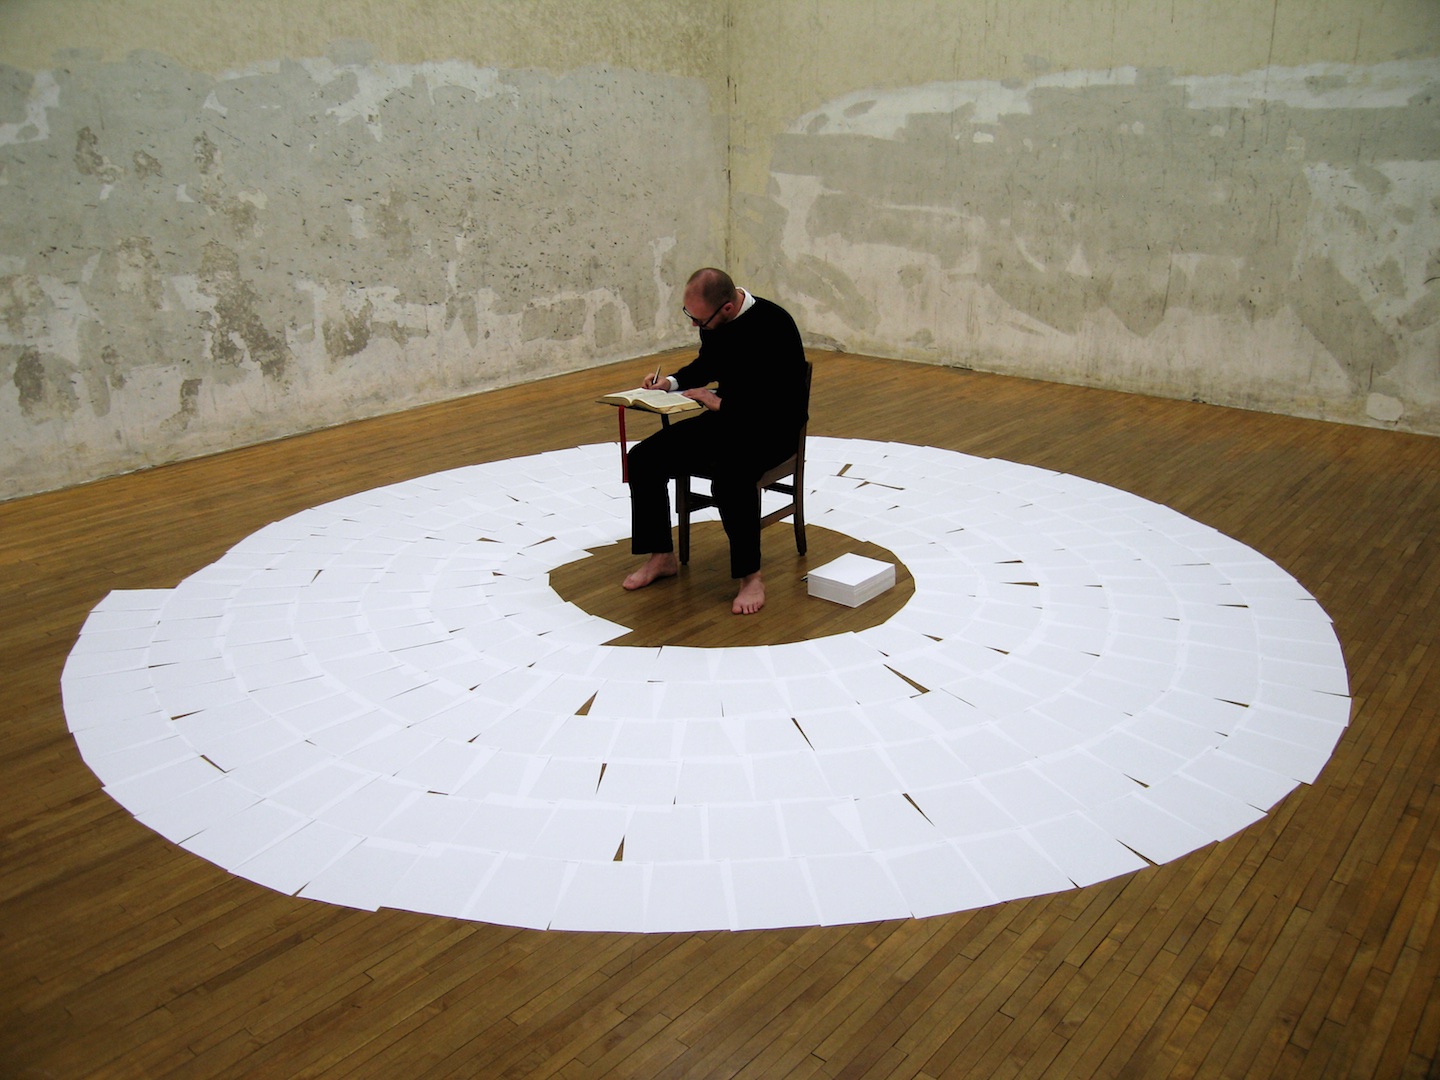     Indexical Scale , 2005  Performance Art  